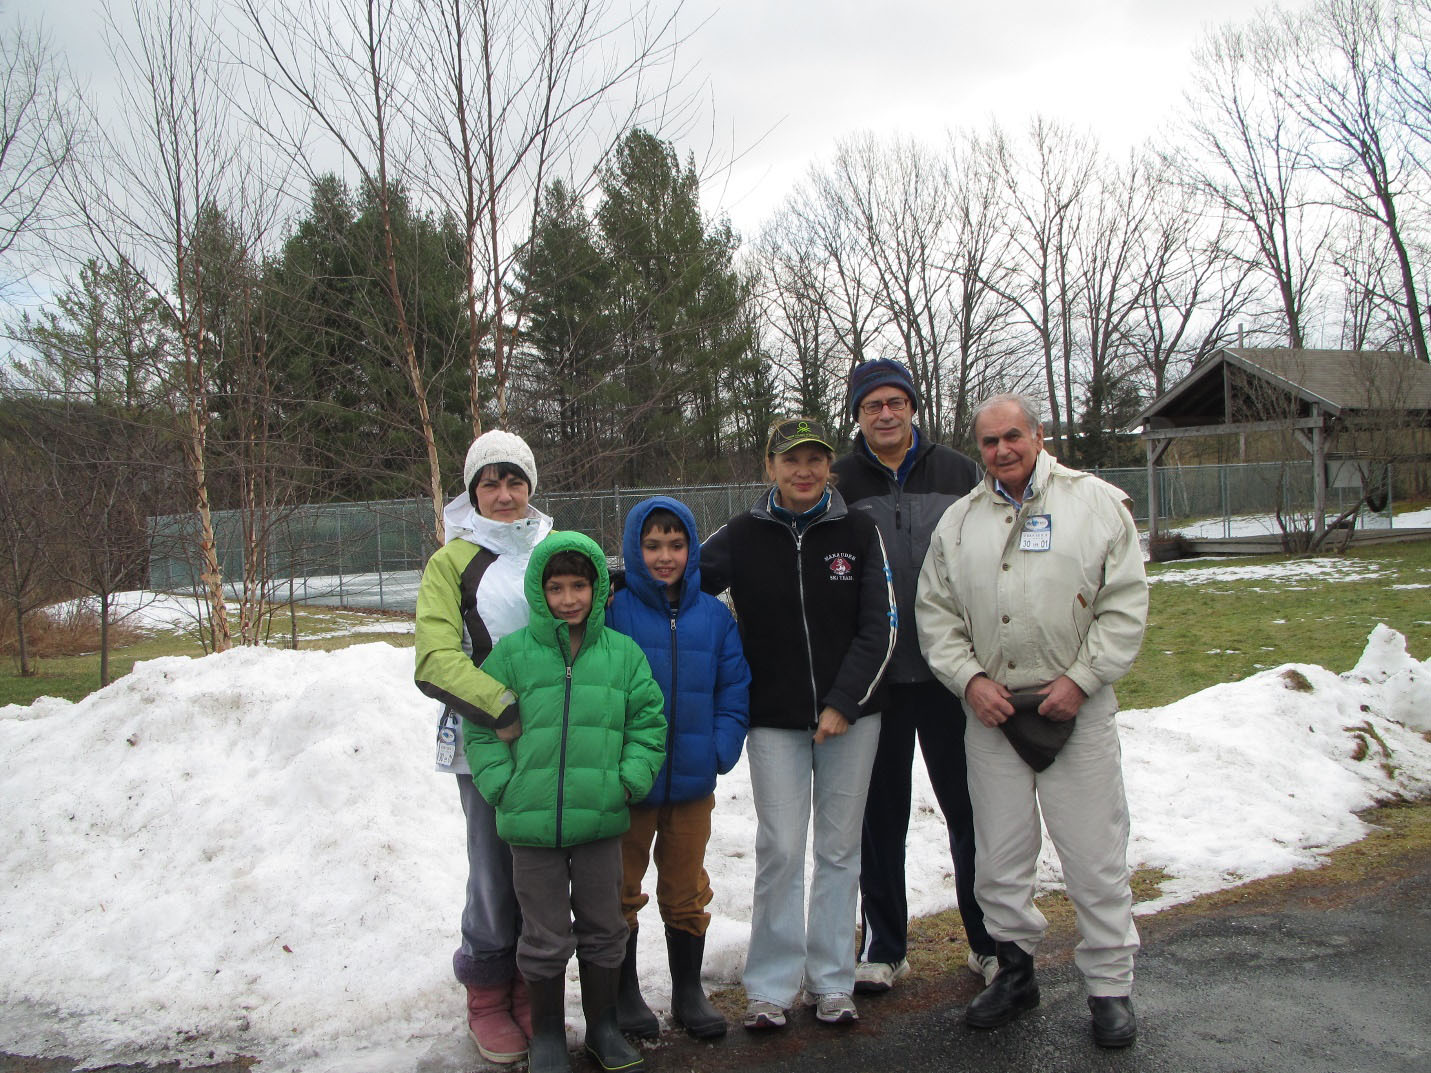 This photo was taken in spring 2013, the last time he visited us in Vermont. The Aivazian family wanted to go skiing, but it was a rainy day and we played paddle tennis instead. From left to right: Tatiana, his two grandkids, Valentina (my wife), myself, and Sergey.